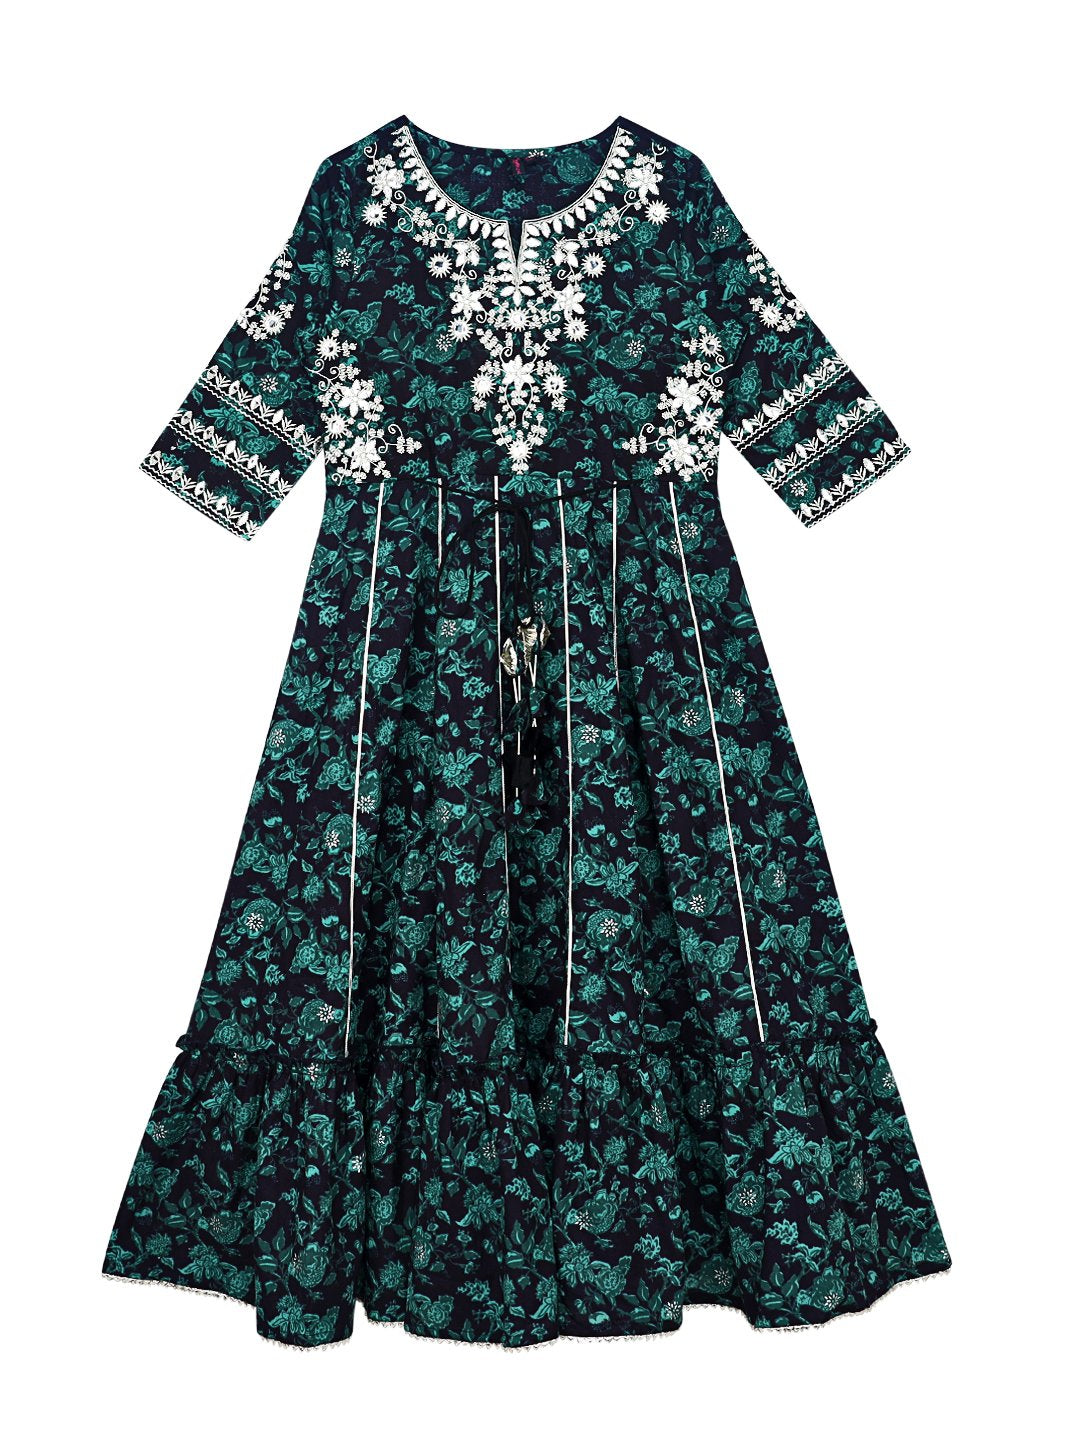 Ishin Girls Green Embroidered Tiered Dress